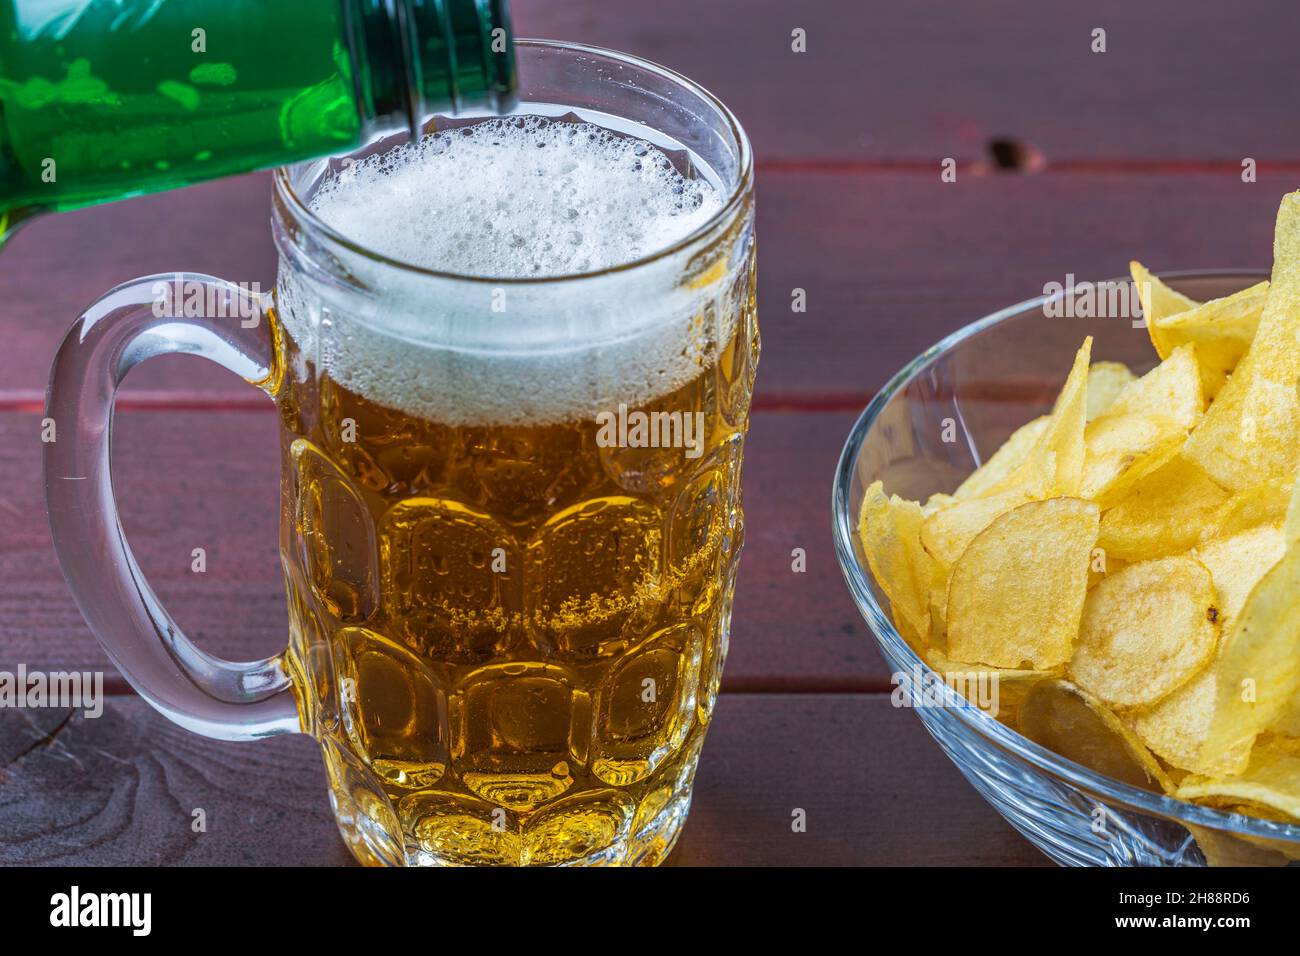 View of pouring beer into a mug and plates with potato chips isolated on wooden background. Stock Photo